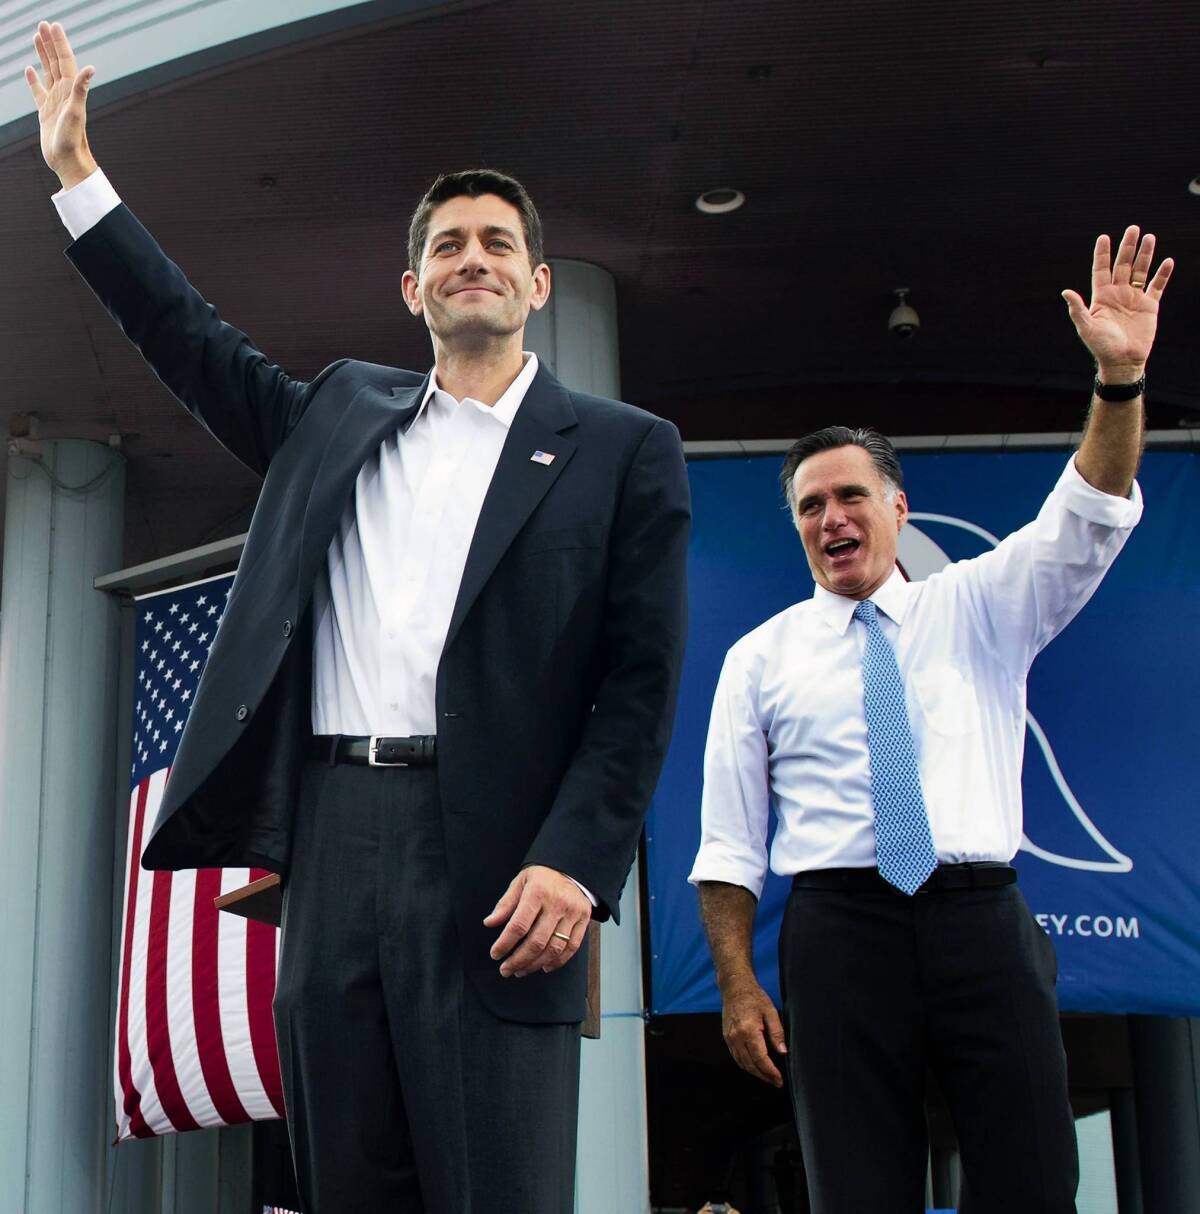 Rep. Paul D. Ryan's ill-fitting suit on the day he joined Mitt Romney as his running mate prompted several critiques.